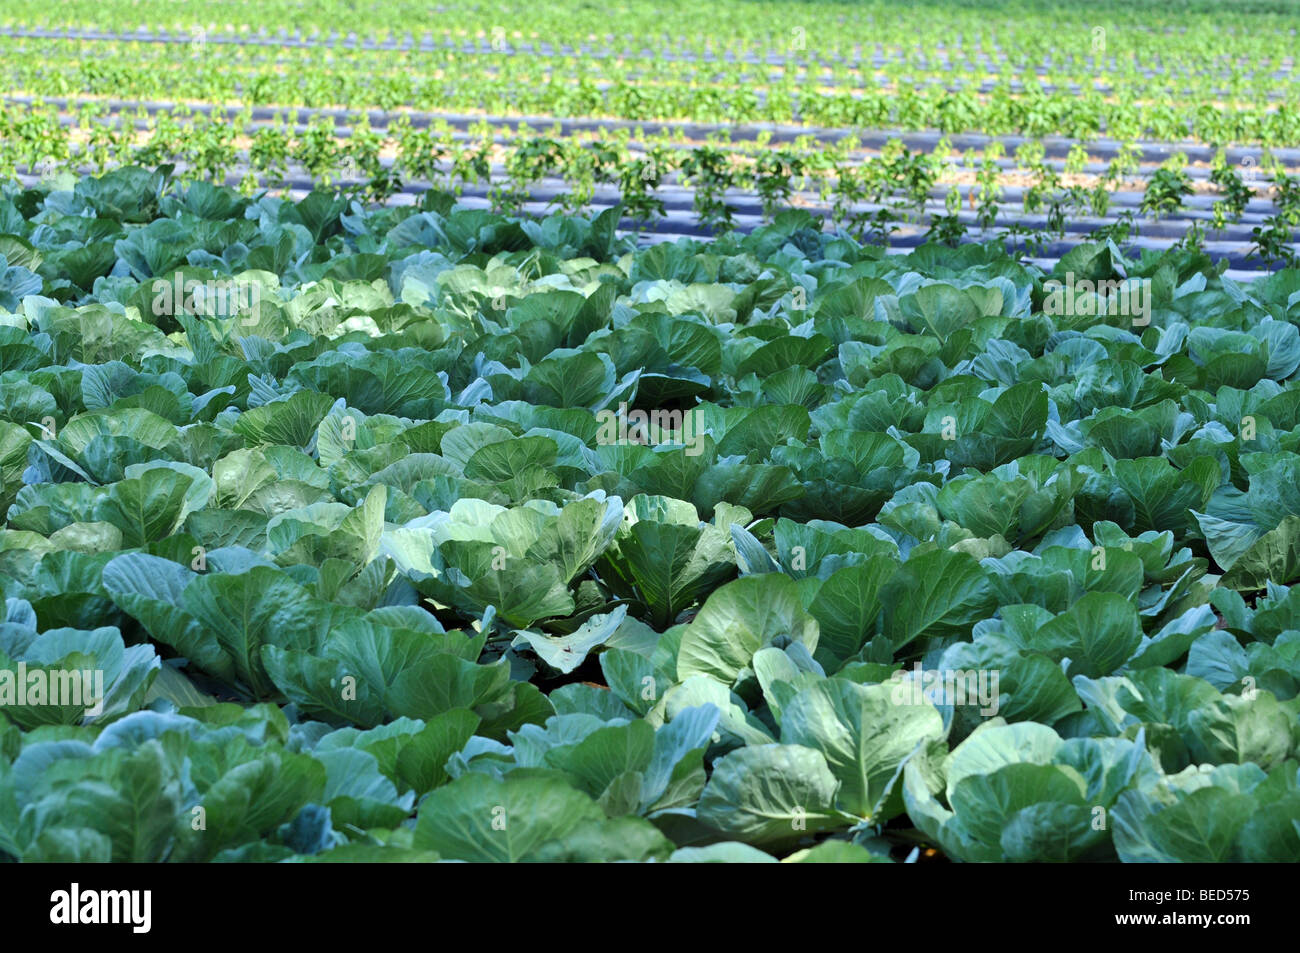 Organic cabbage farm during a sunny day Stock Photo